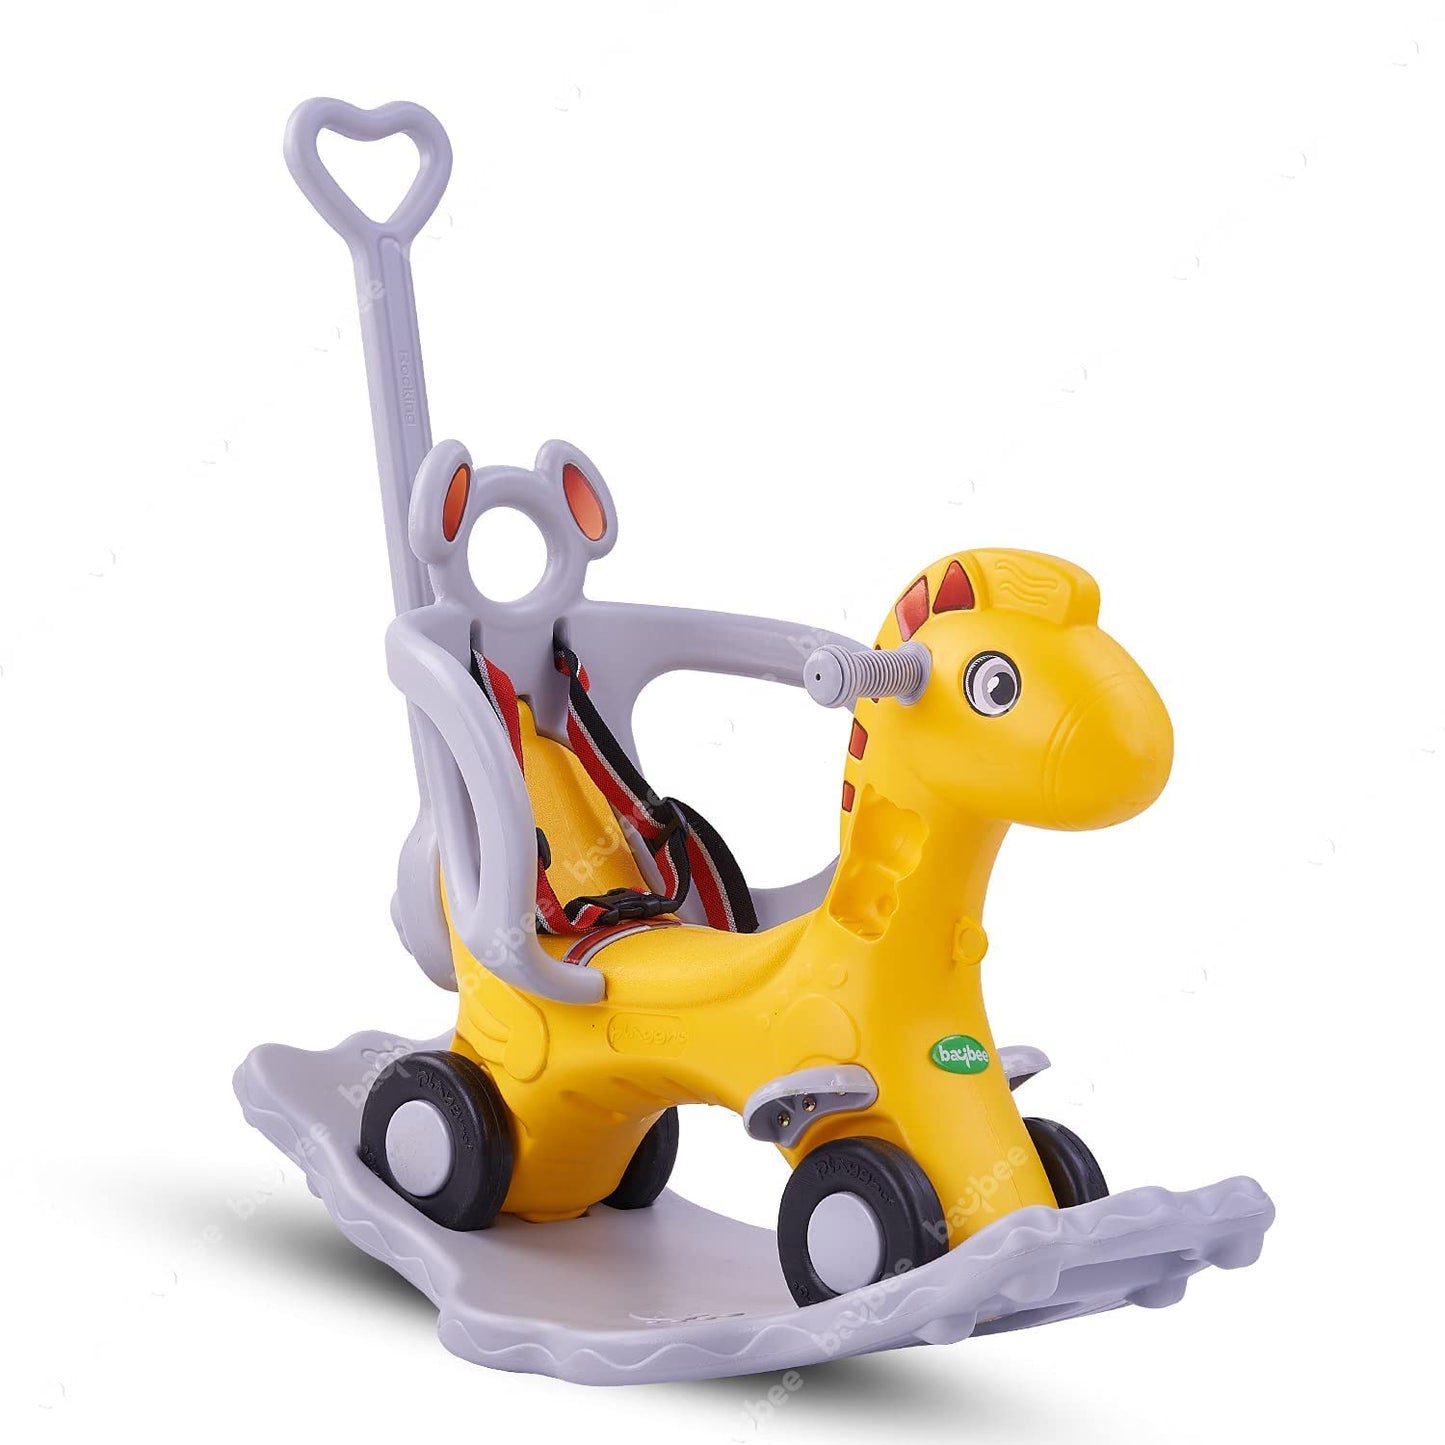 Baybee 3 in 1 Baby Horse Rider Ride on Toy Car for Kids, Baby Rocking Chair Ride on Push Car with Push Handle